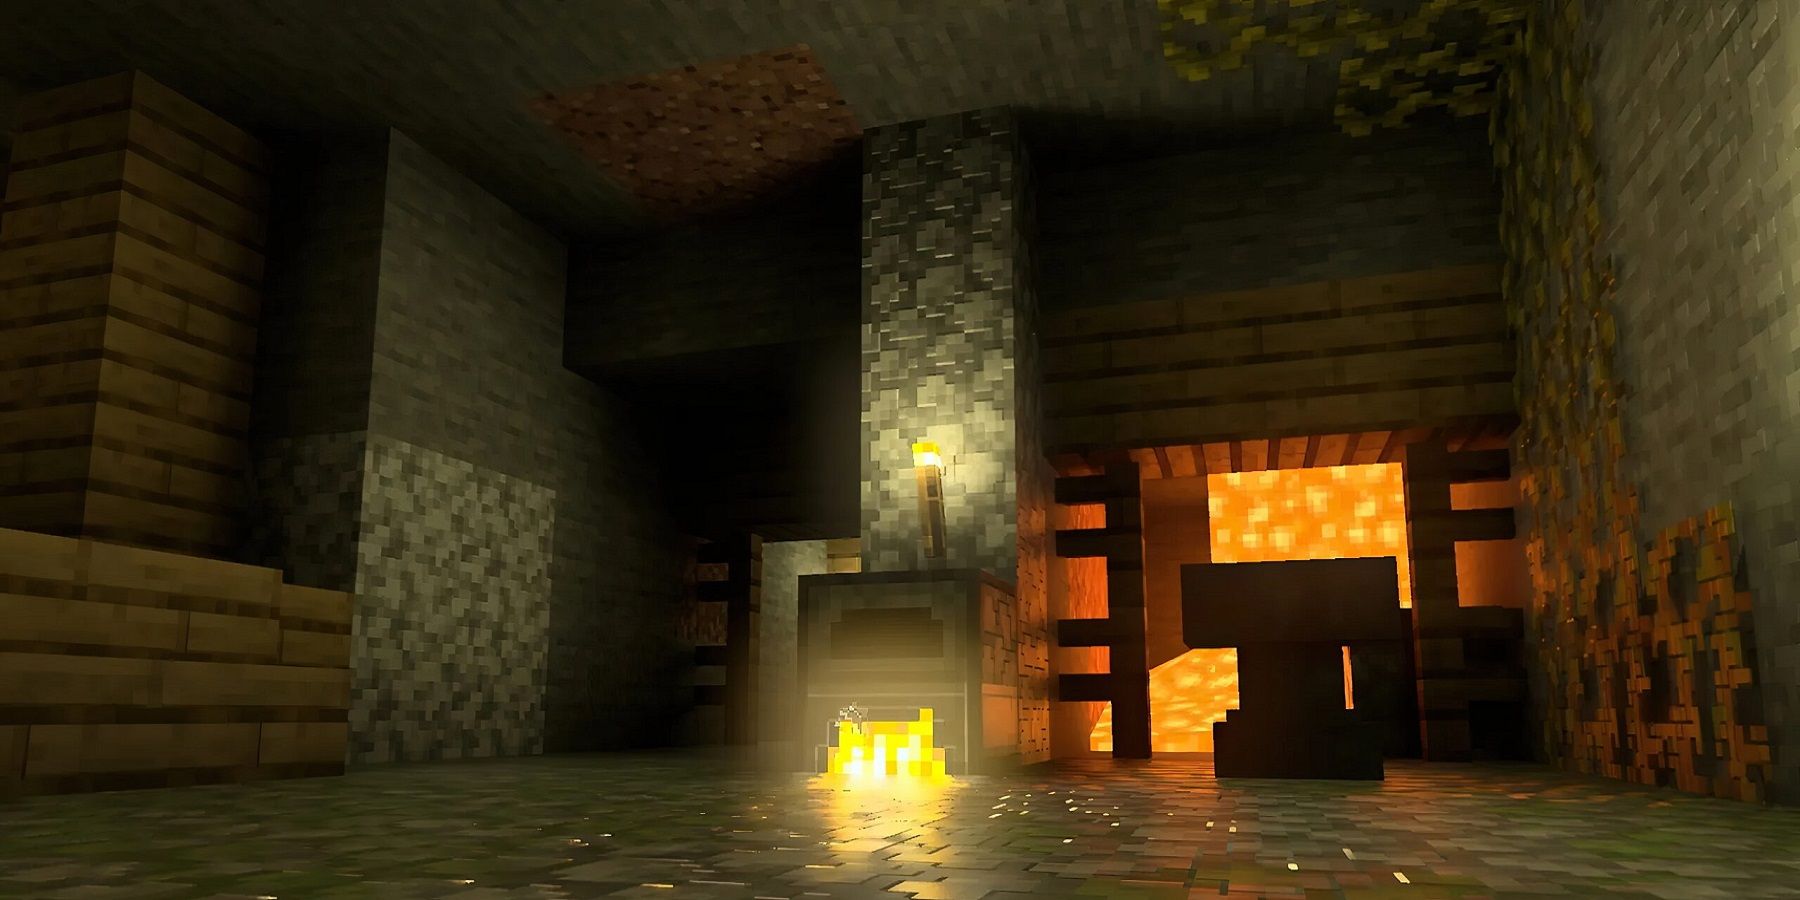 Screenshot from Minecraft showing an underground section lit up with RTX lighting.